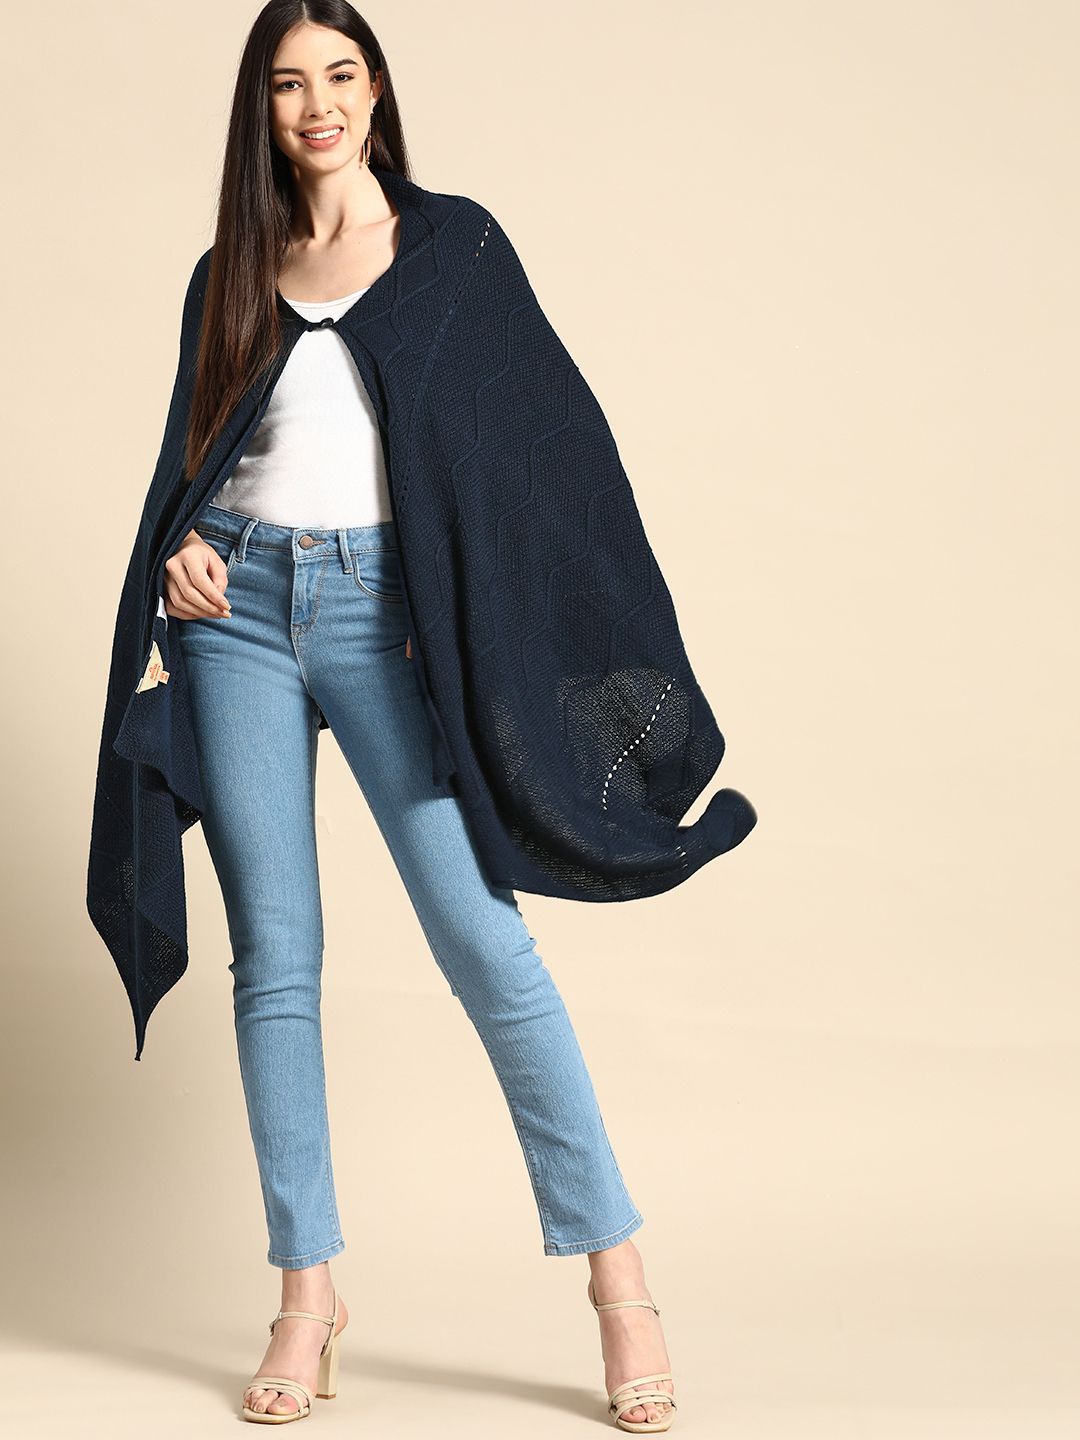 Anouk Women Navy Blue Acrylic Self-Design Cape Style Waterfall Front Winter Shrug Price in India